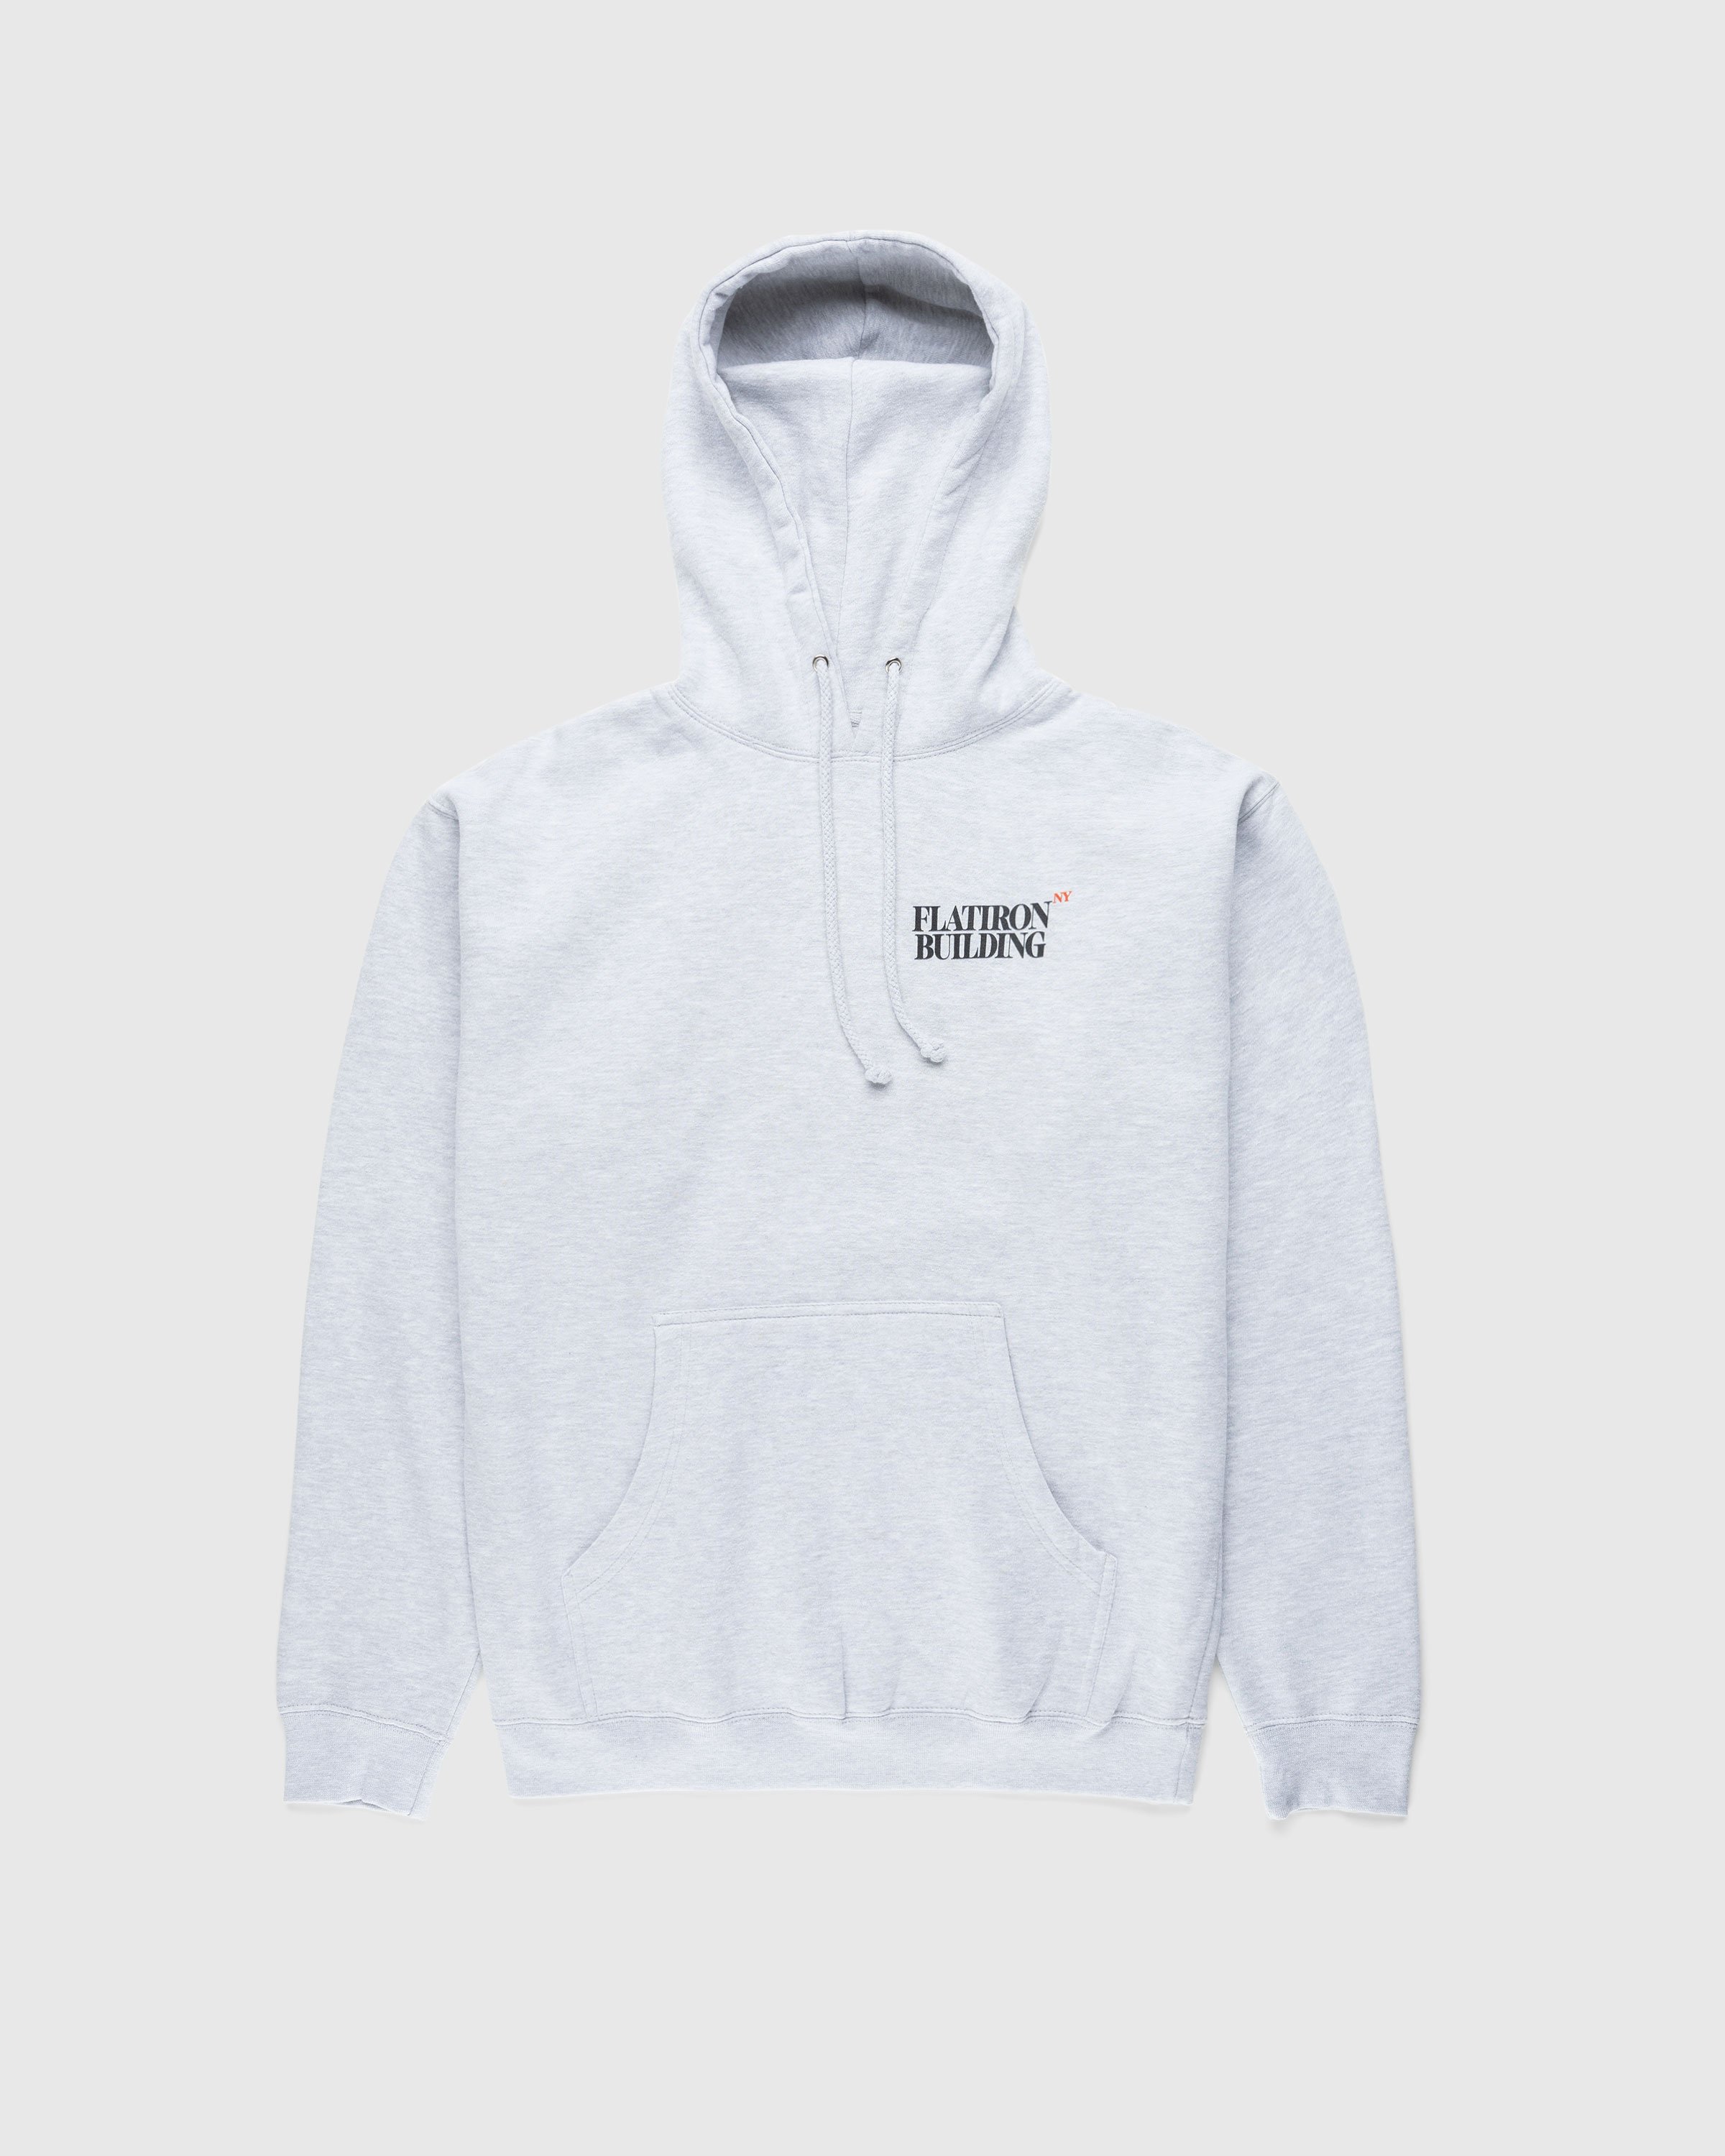 At The Moment x Highsnobiety - Flatiron Building Hoodie - Clothing - Grey - Image 2